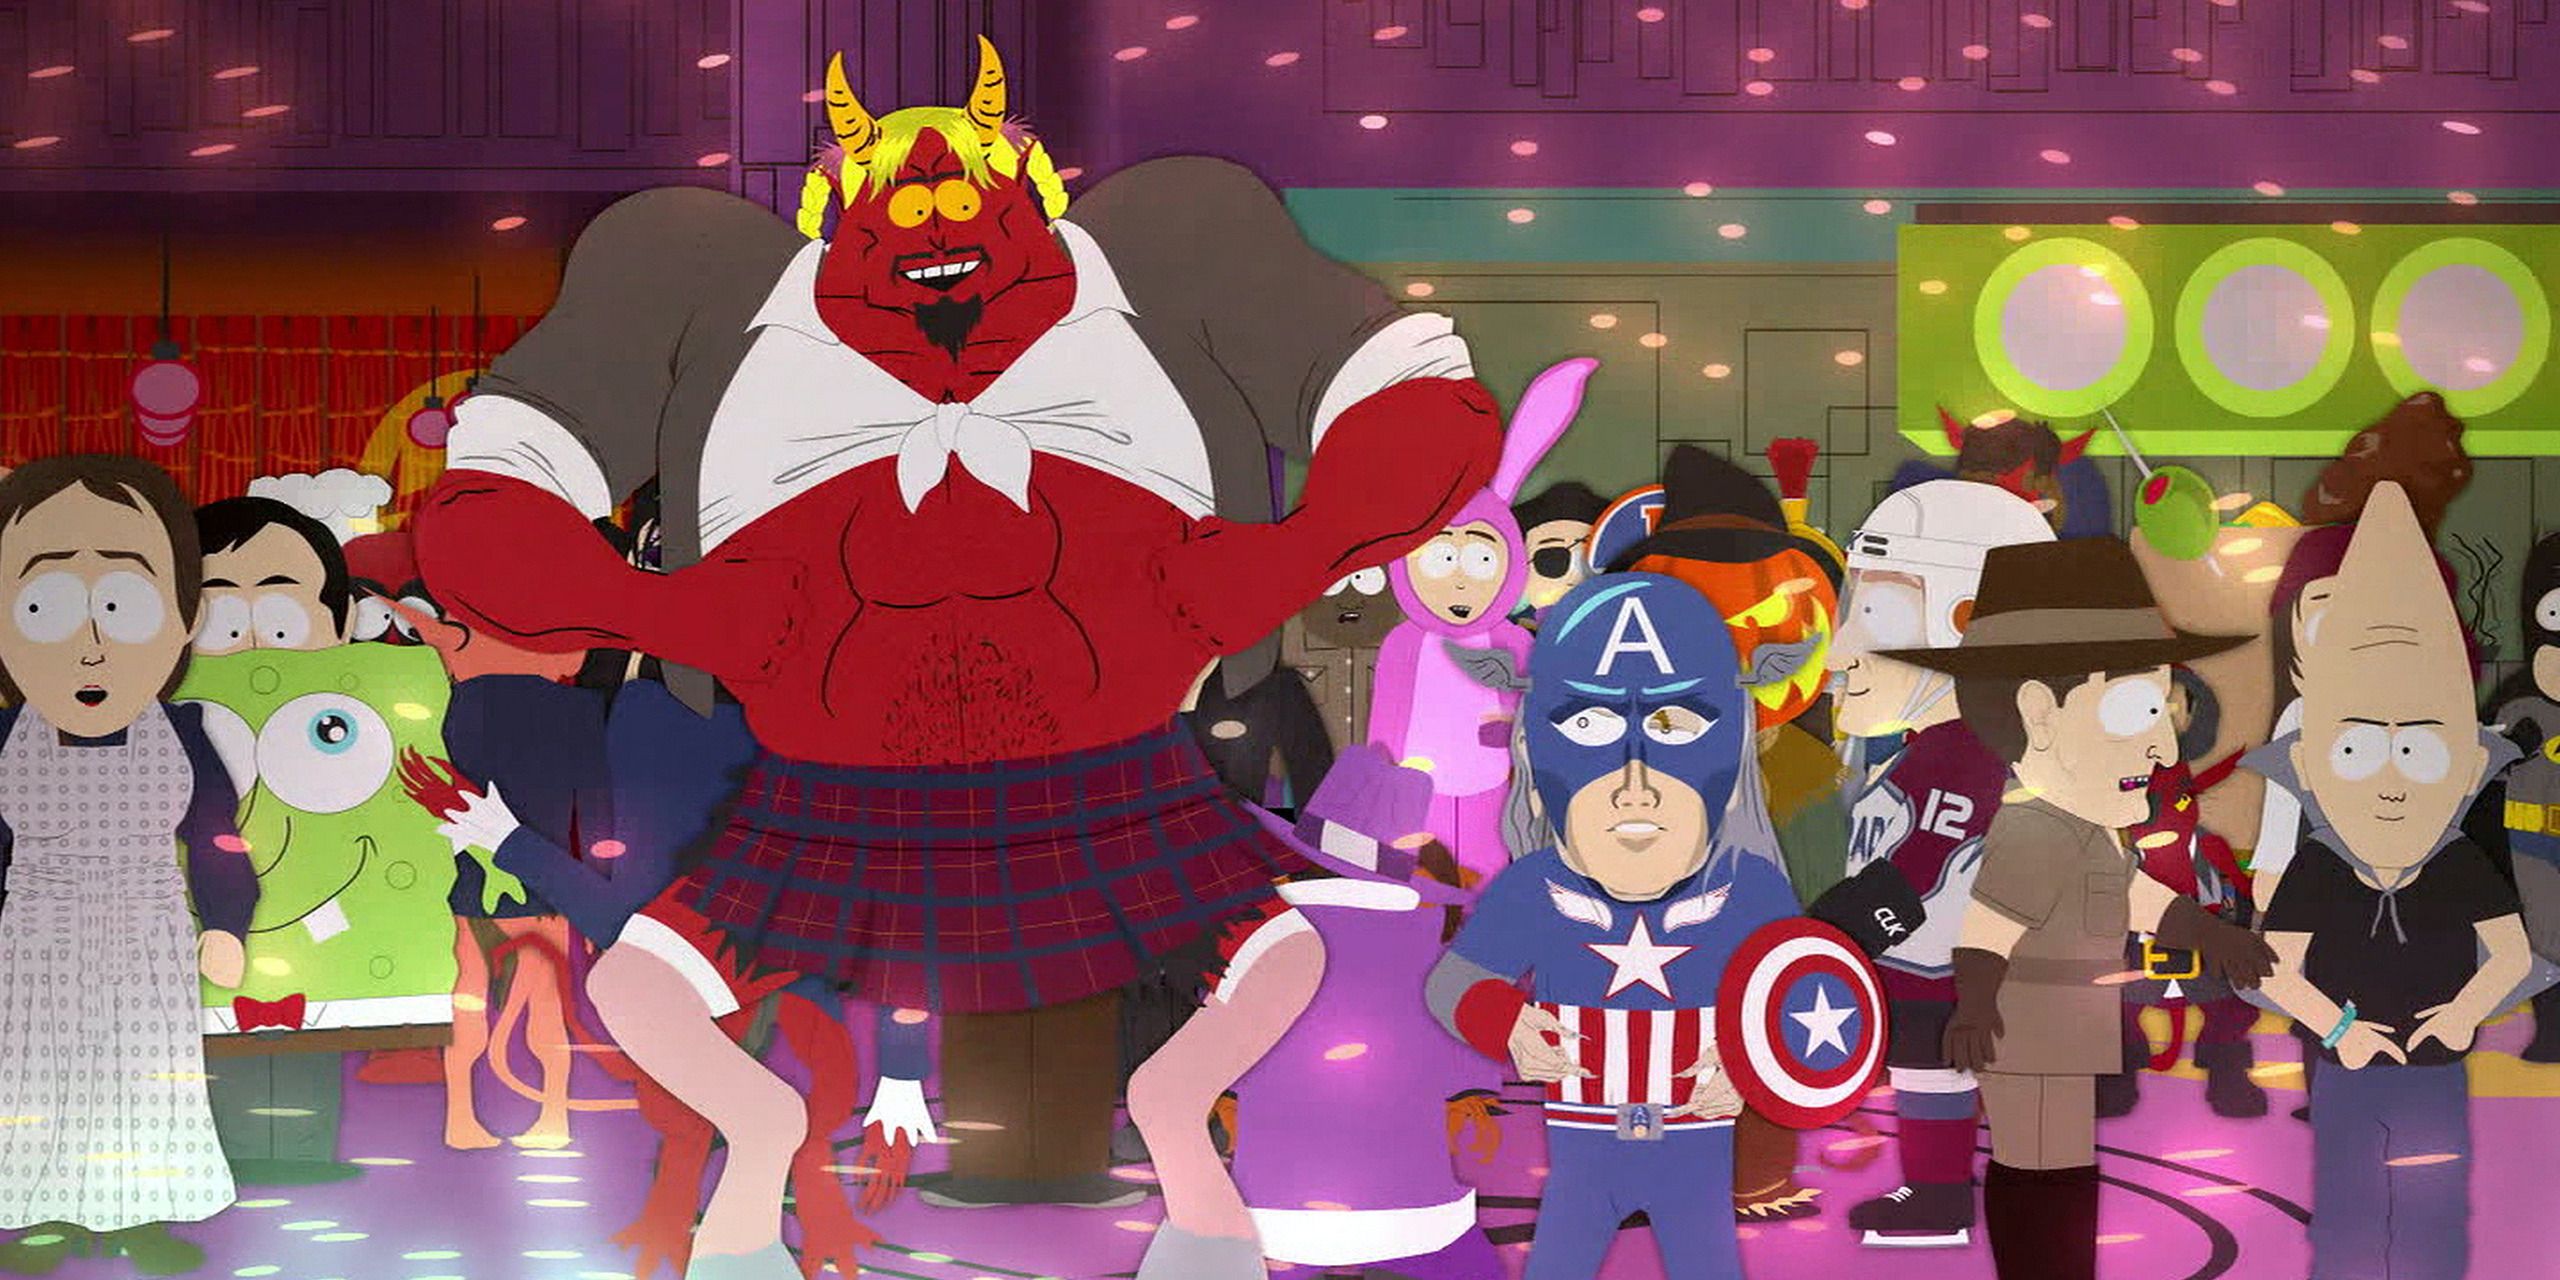 Satan at a costume party in South Park's Hell on Earth.